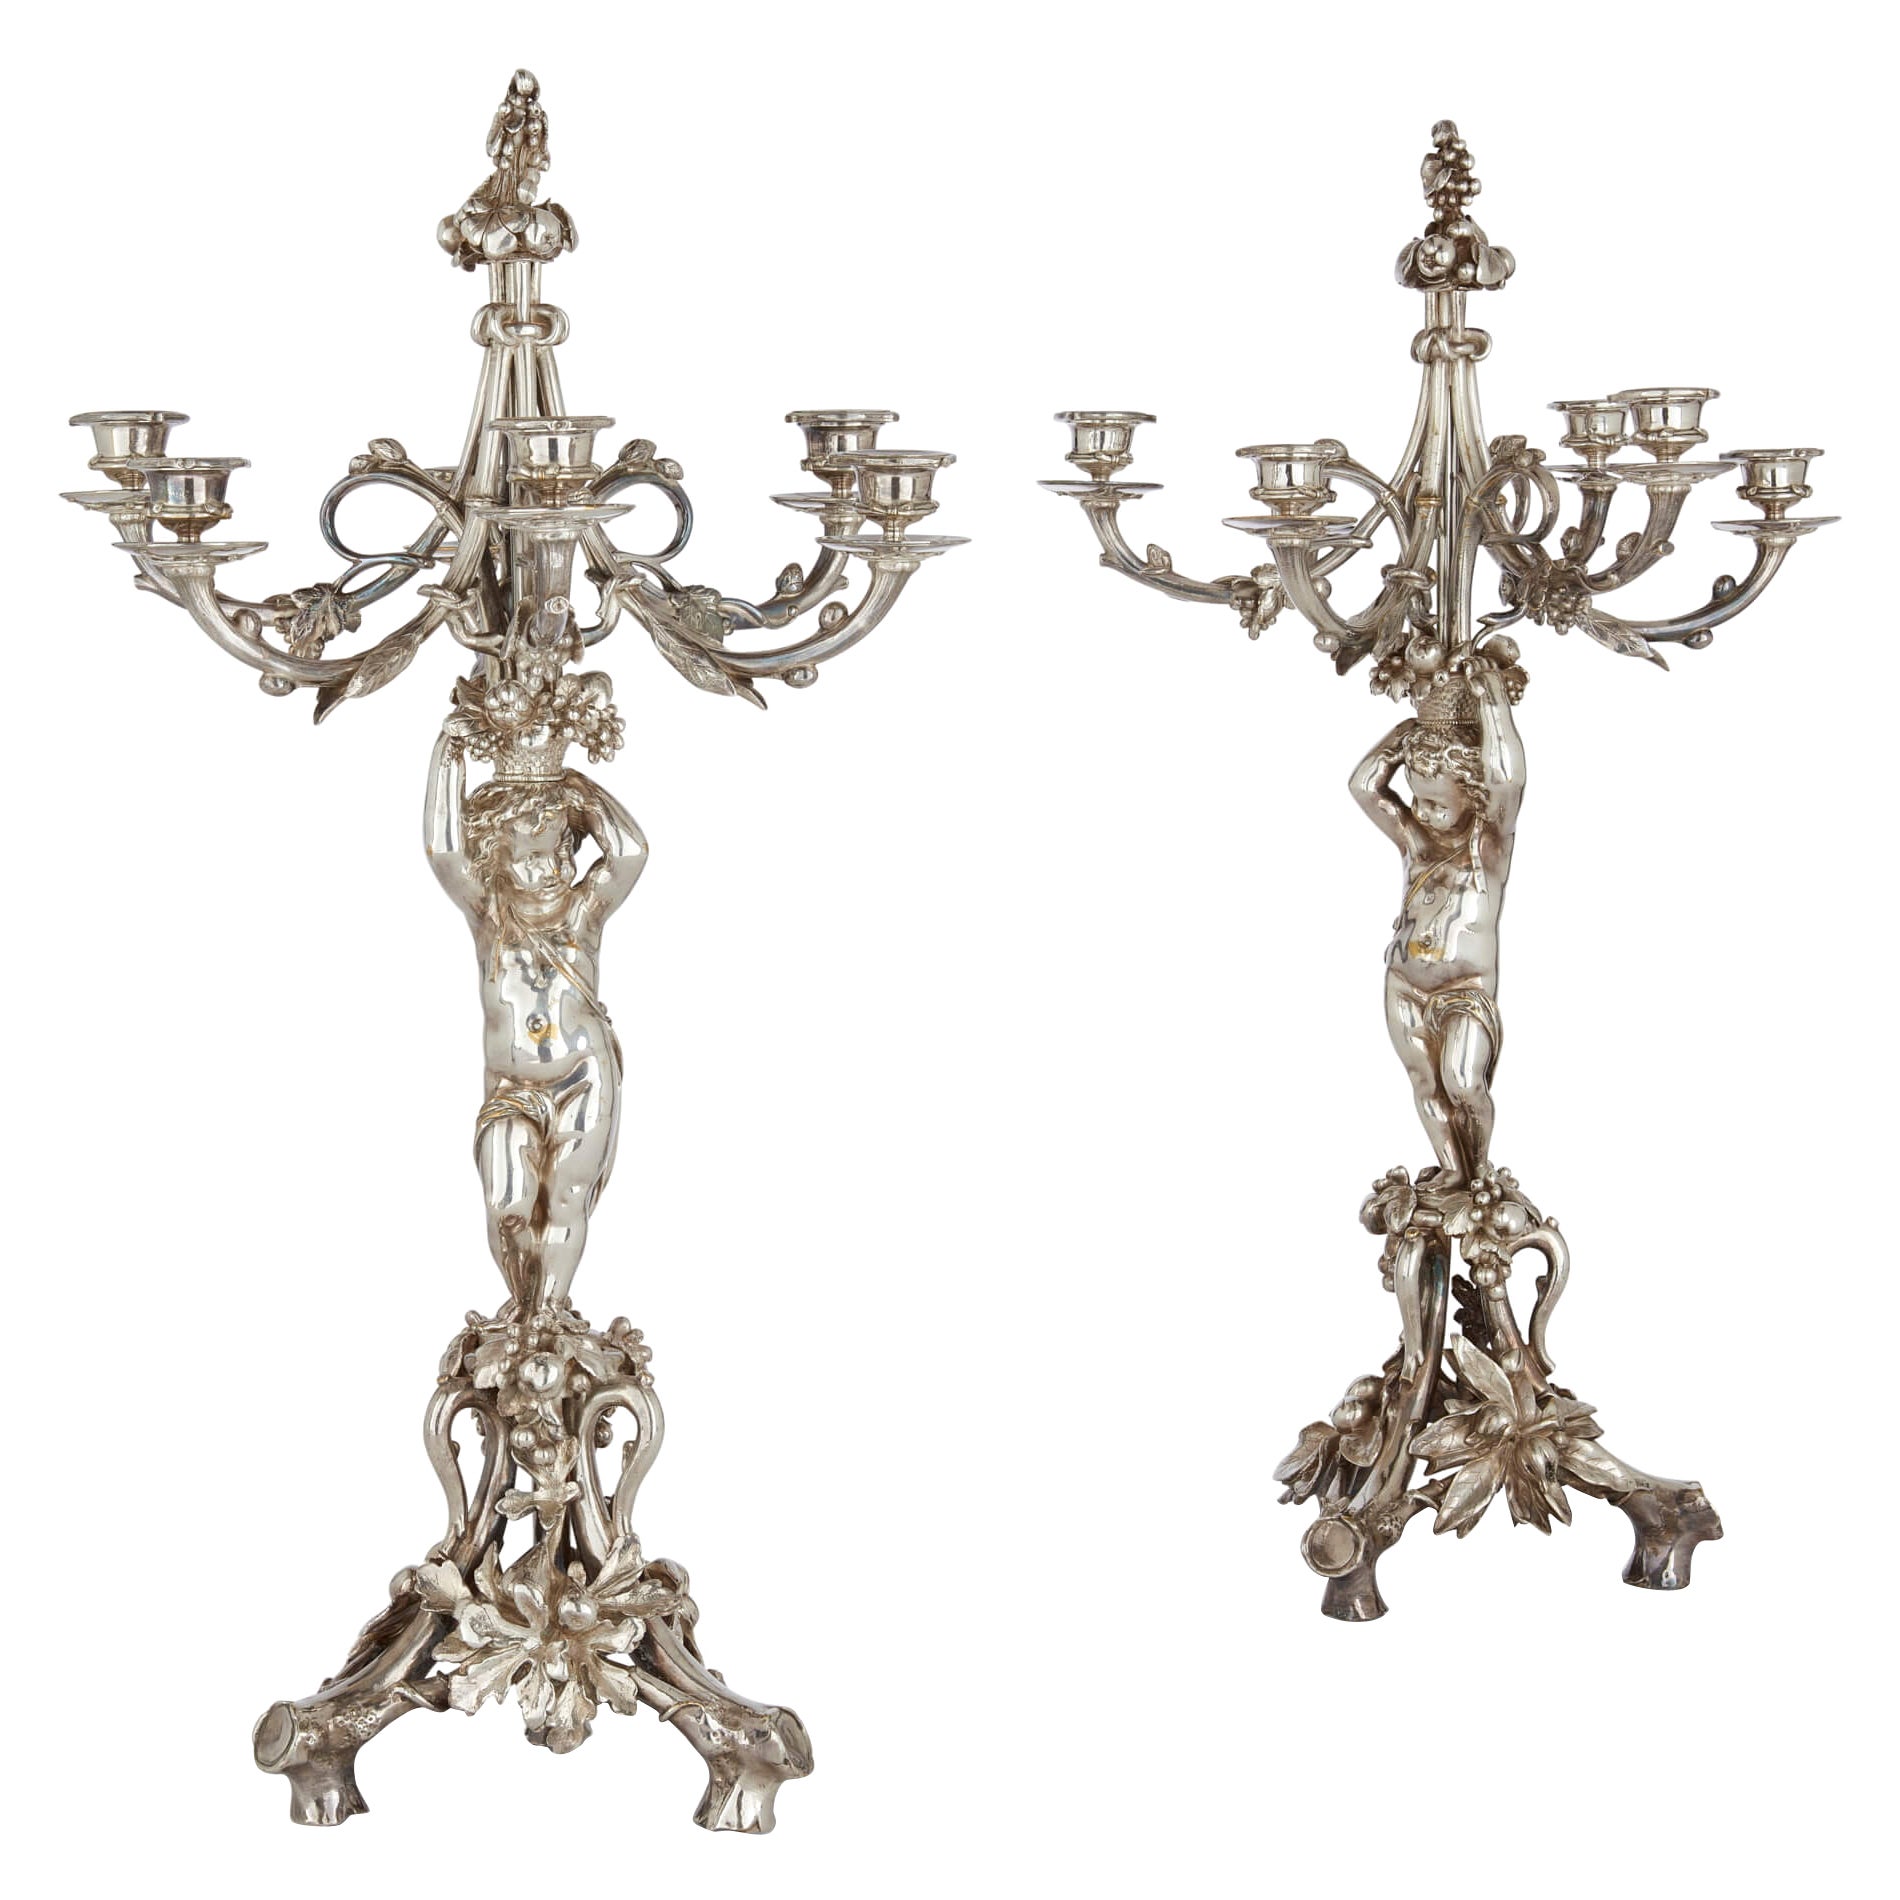 Pair of Six-Light Silvered Bronze Candelabra Attributed to Christofle